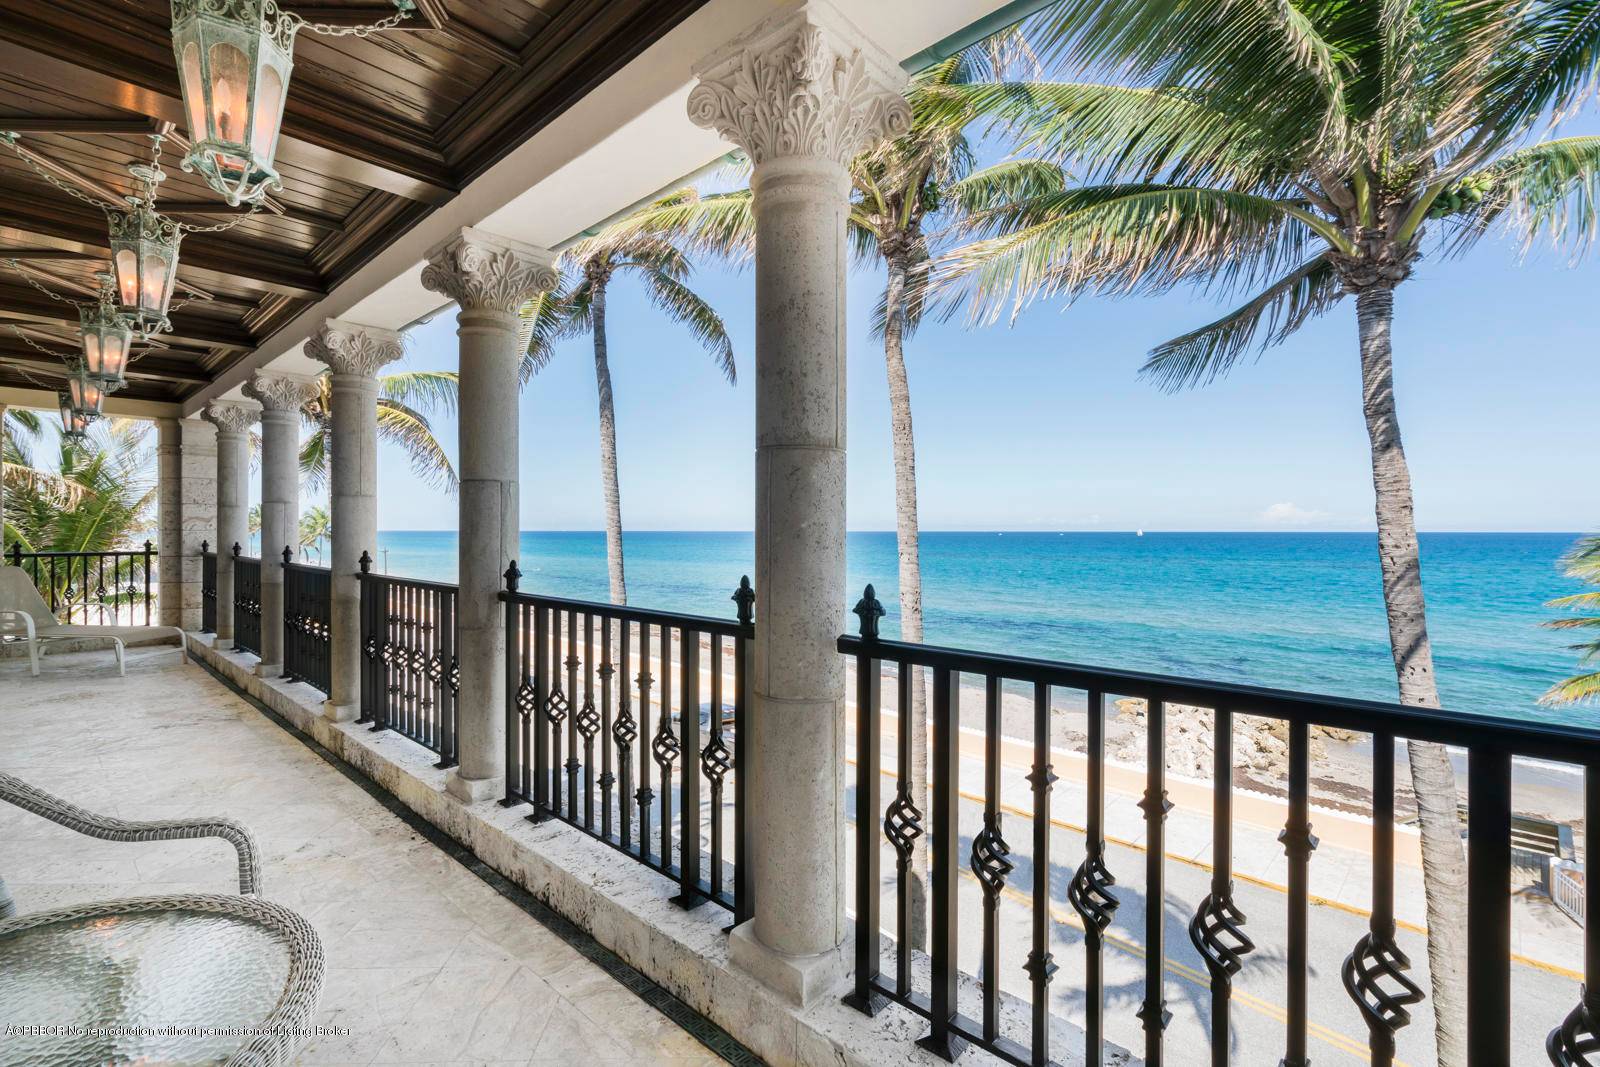 Masterfully crafted oceanfront Venetian Villa with 7, 700 total square feet.